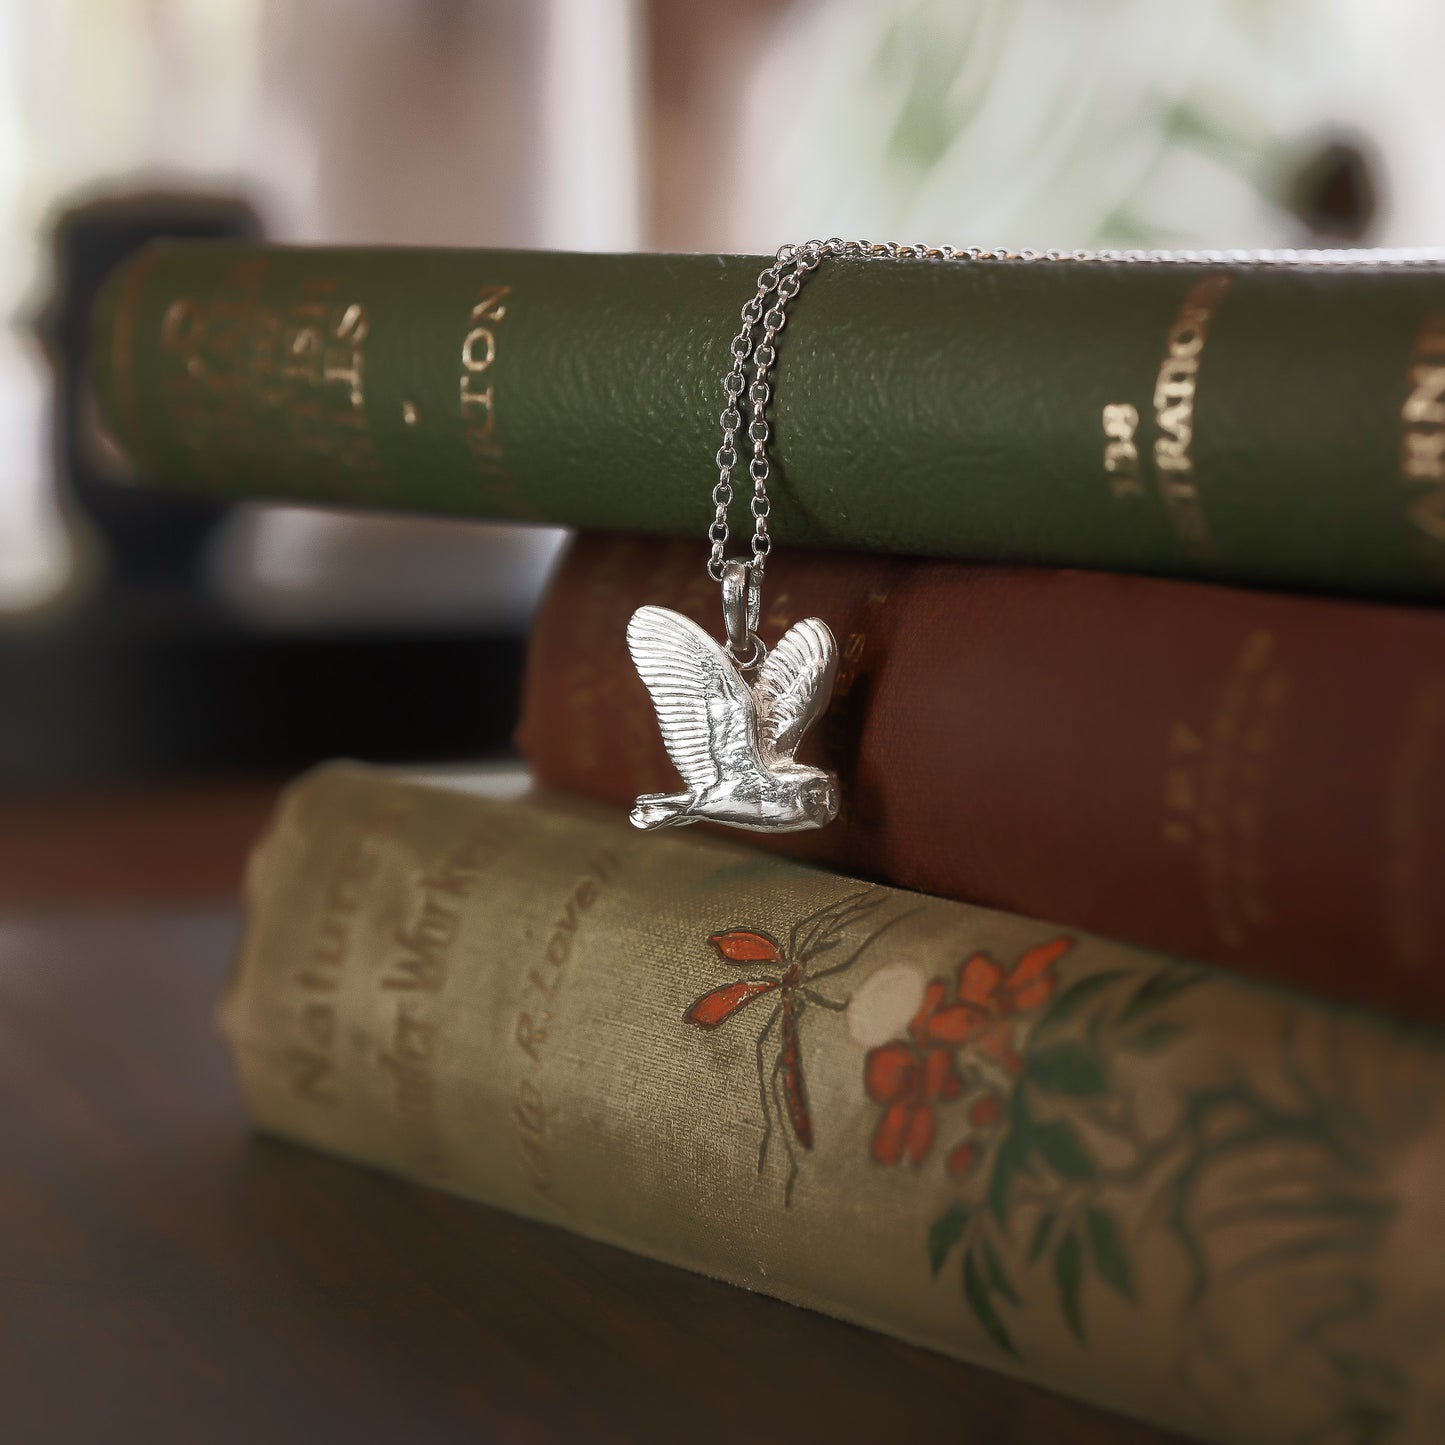 Flying Barn Owl Sterling Silver Necklace